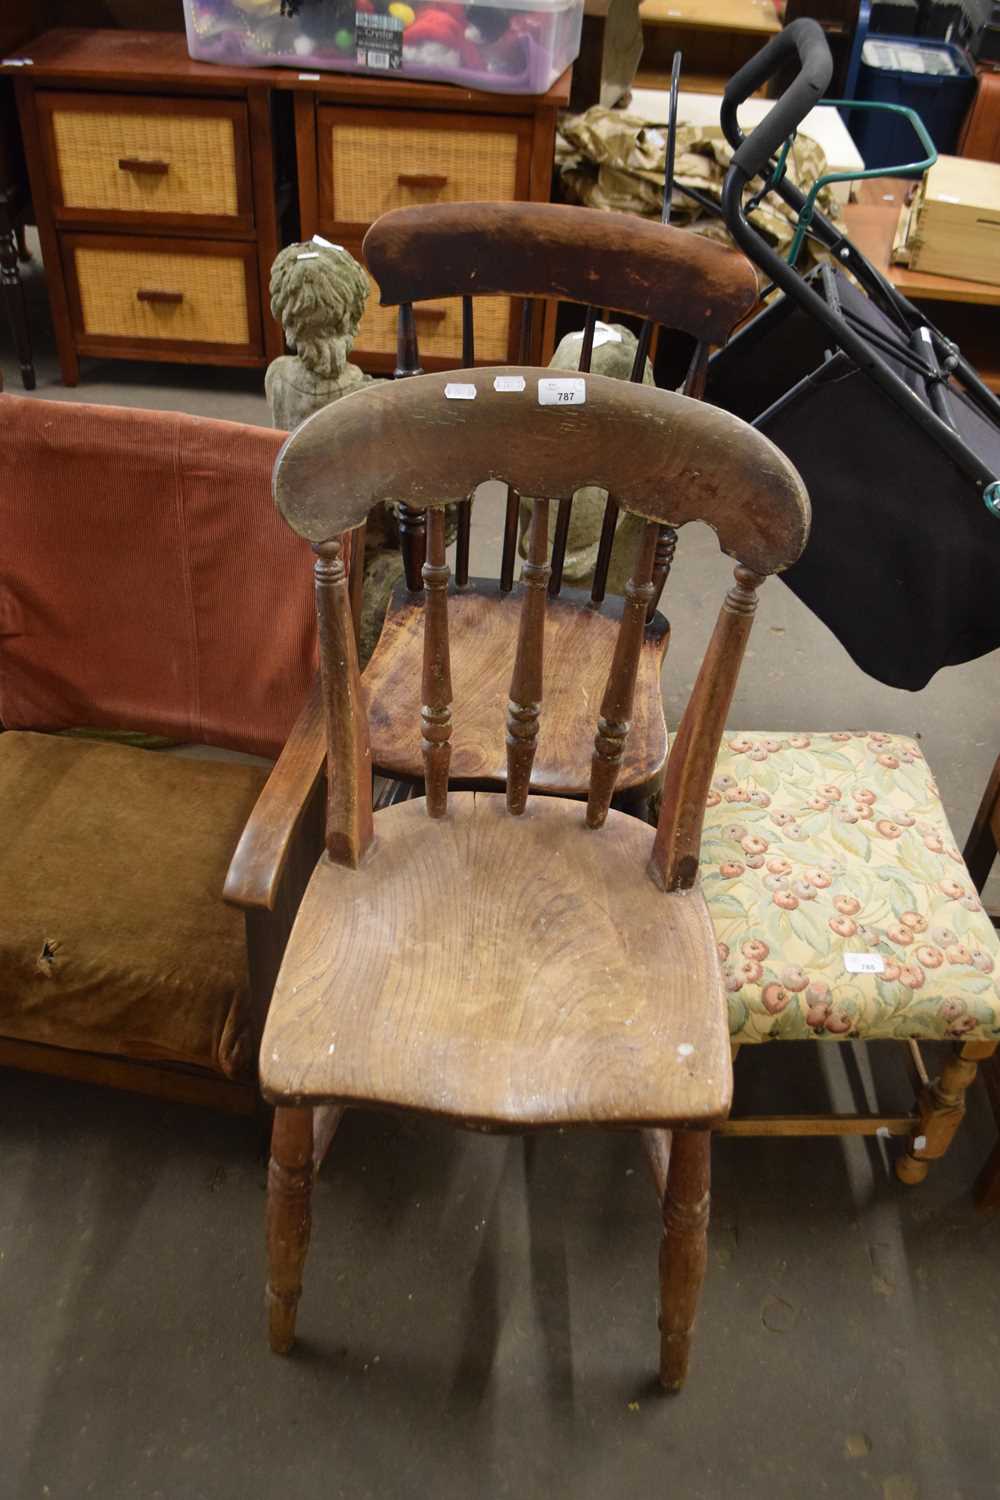 TWO VICTORIAN KITCHEN CHAIRS